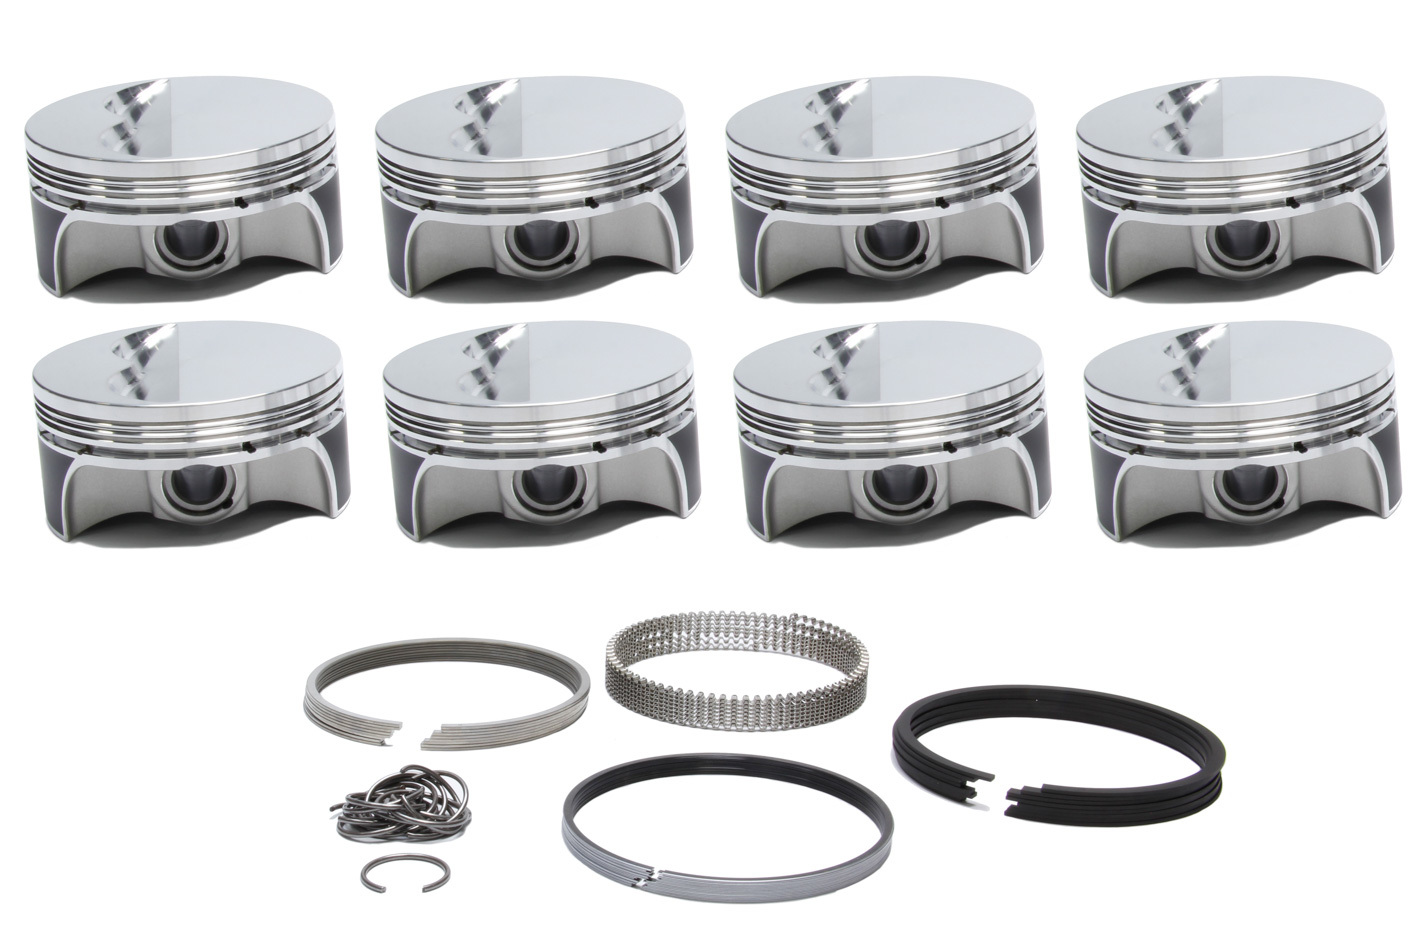 SRP Pistons 279480 Piston and Ring, Forged, 4.040 in Bore, 1.20 x 1.50 x 3.00 mm Ring Grooves, Minus 5.00 cc, Small Block Chevy, Kit